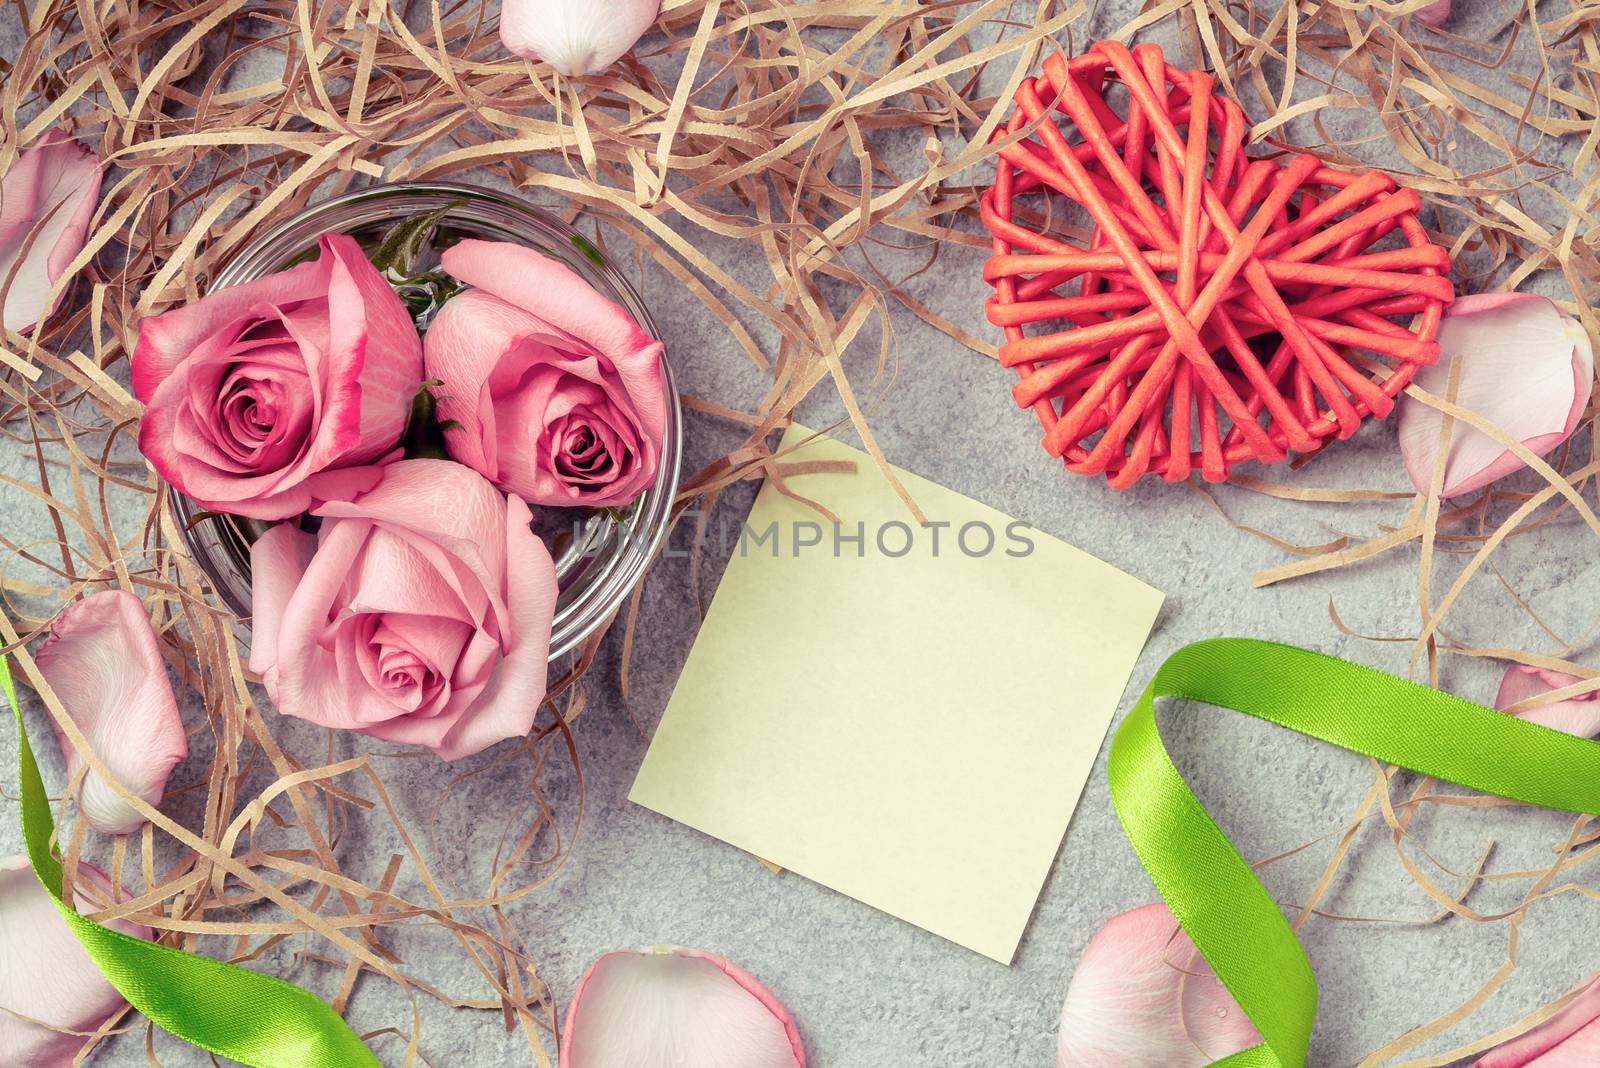 Pink roses in the water, a wicker heart, ornaments and an empty form for a note on the table.